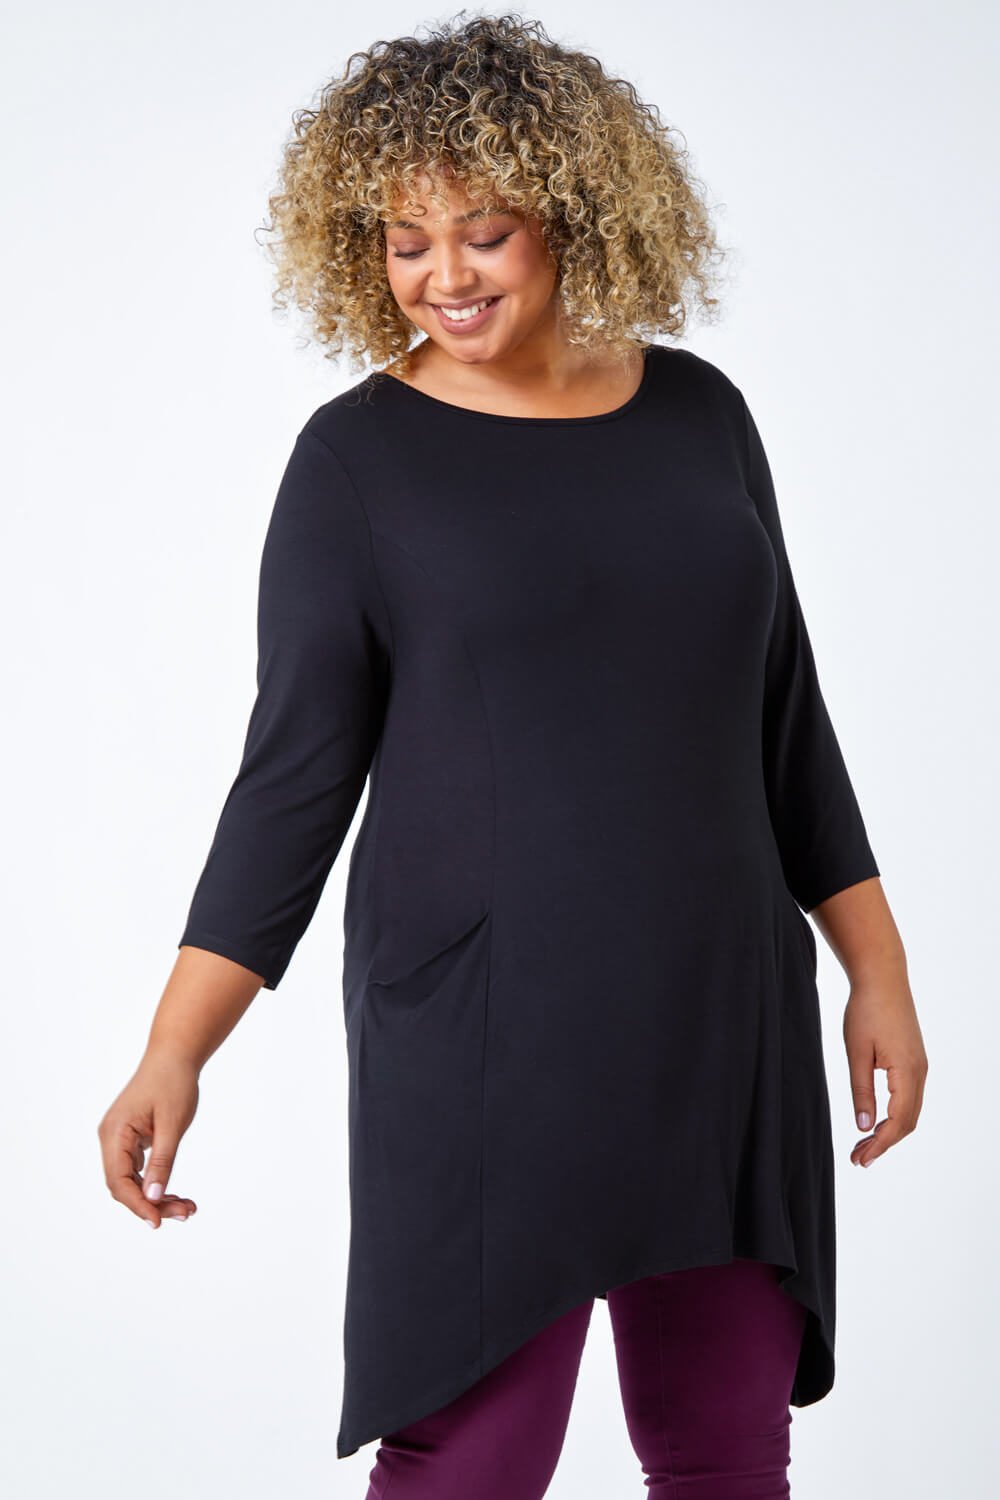 Black Curve Pocket Detail Stretch Tunic Top, Image 1 of 5